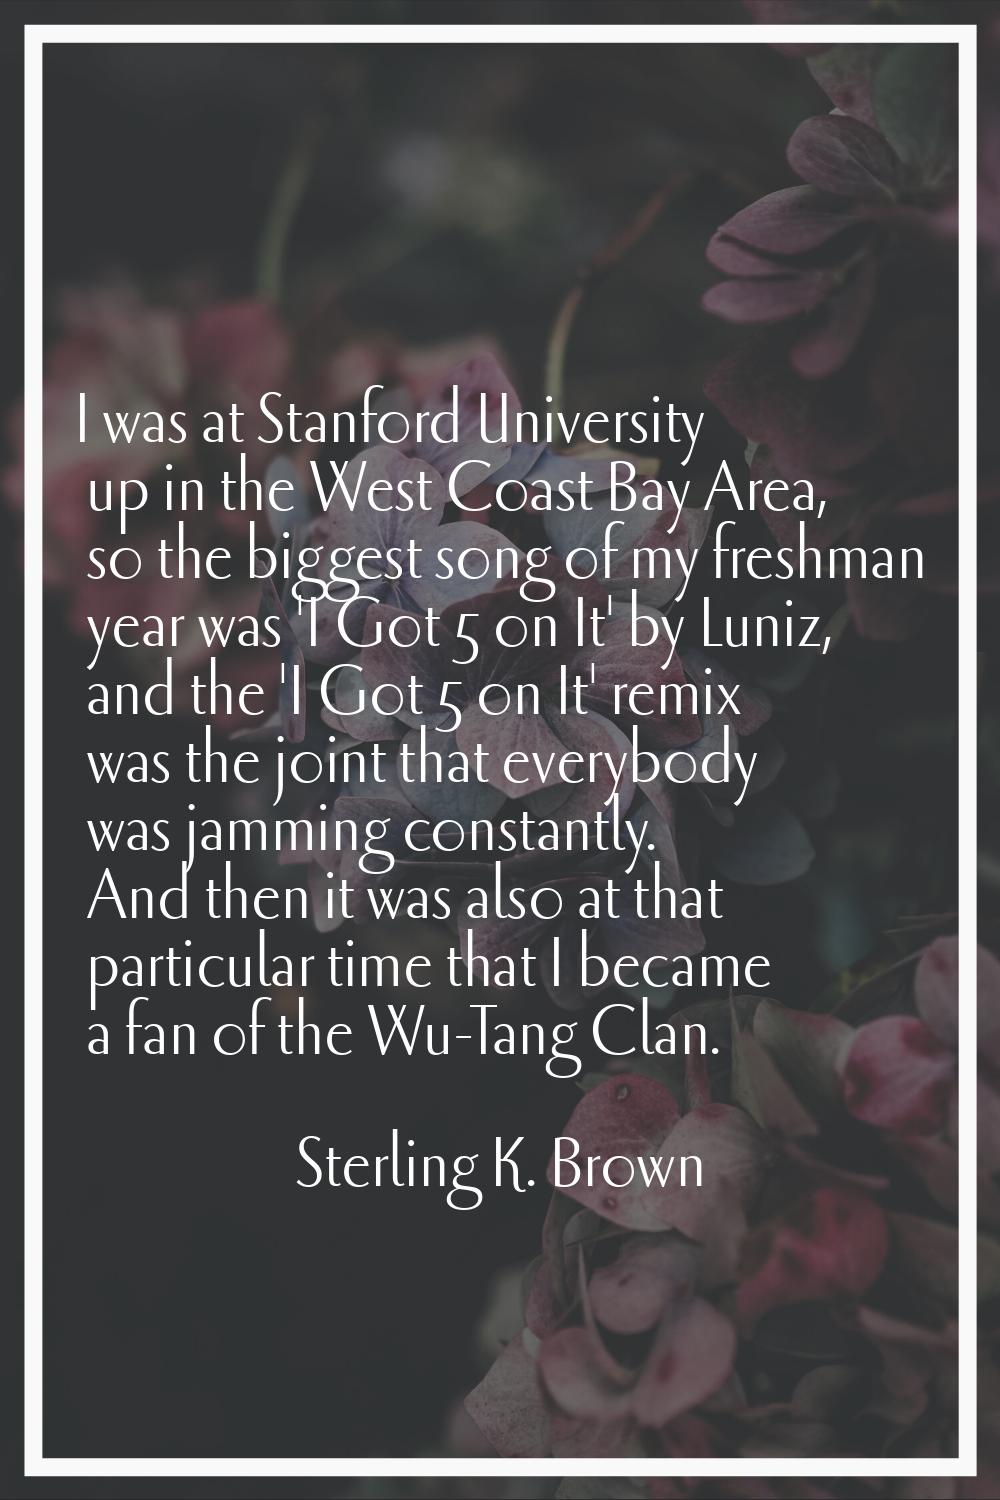 I was at Stanford University up in the West Coast Bay Area, so the biggest song of my freshman year